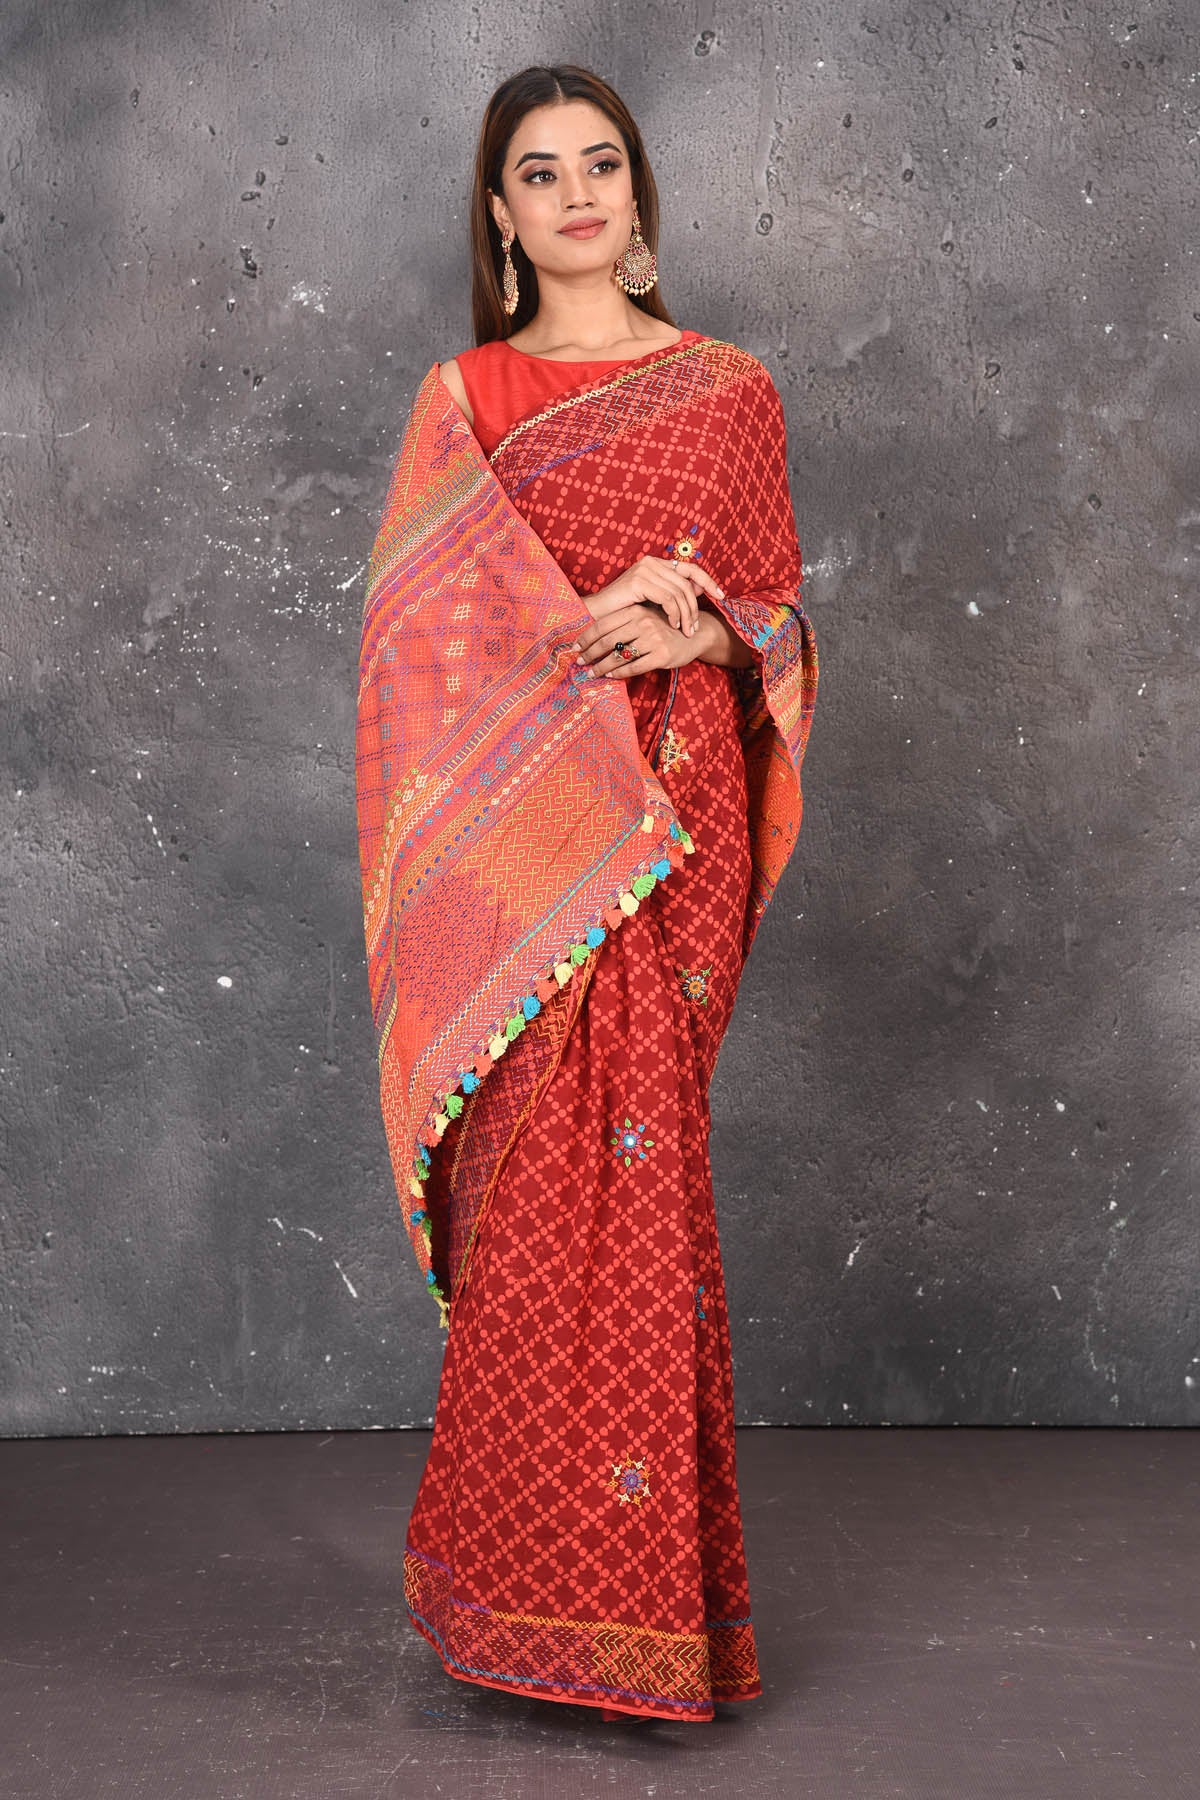 Shop this classy red hand painted madhubani cotton saree online in USA. Perfect to be worn as part of your everyday work wear, with this hand-painted red Madhubani saree, elegance meets traditional. Add this designer Lambani embroidery designer saree with colored tassels to your collection from Pure Elegance Indian Fashion Store in USA.- Full view with Wrapped Pallu.